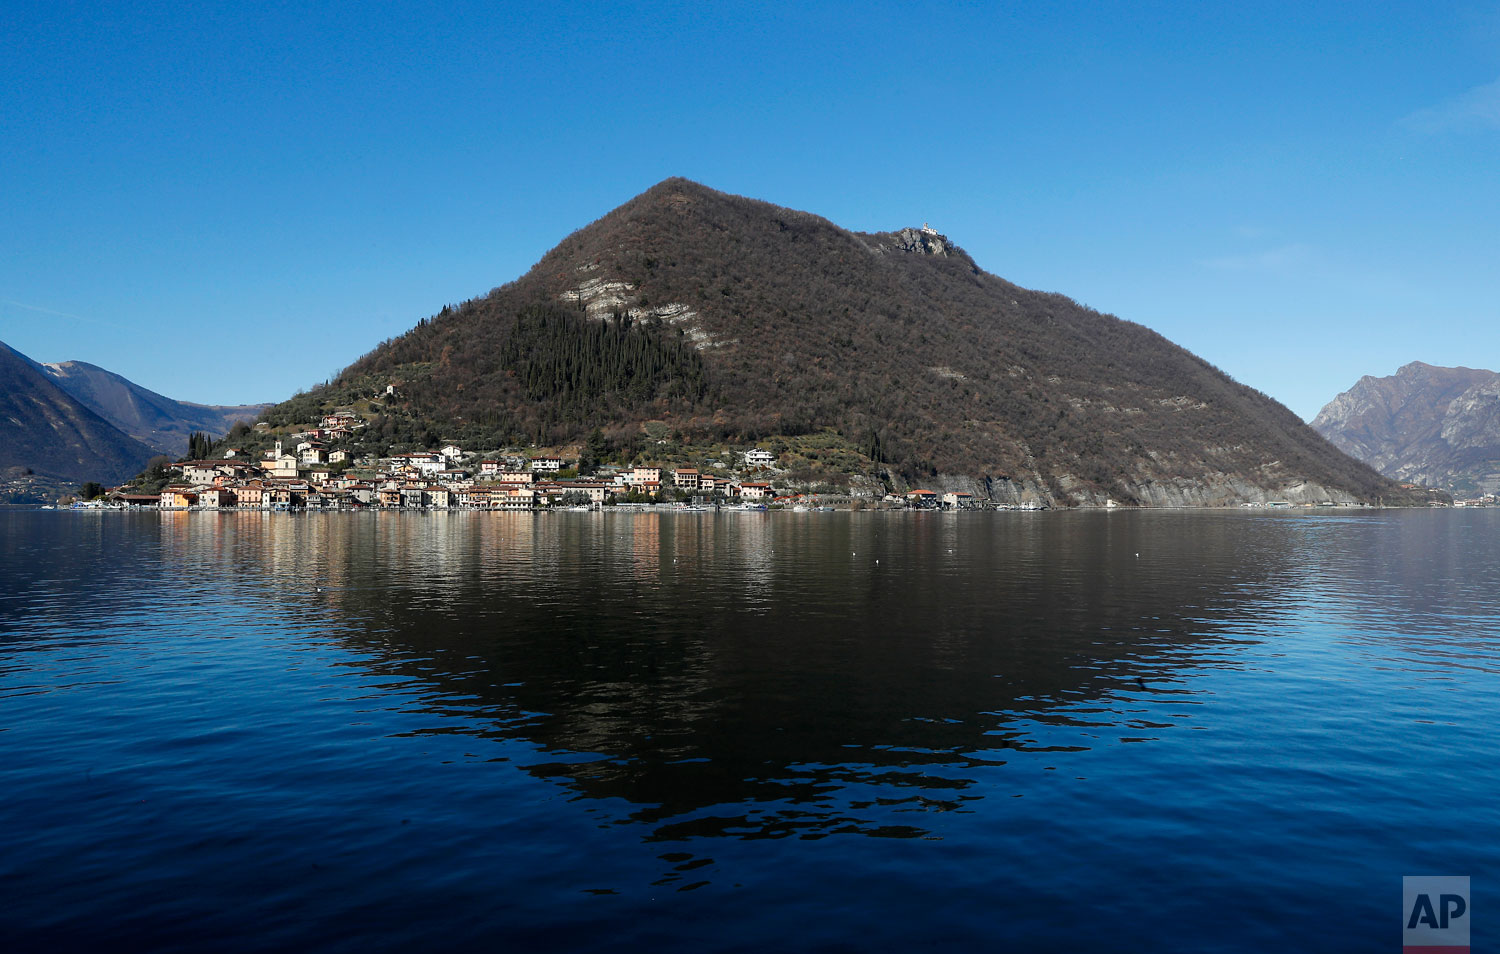  In this photo taken on Wednesday, Feb. 6, 2019, a view of Monte Isola, Lake Iseo, northern Italy. Step off the ferry onto Monte Isola and it feels like going back in time.  (AP Photo/Antonio Calanni) 